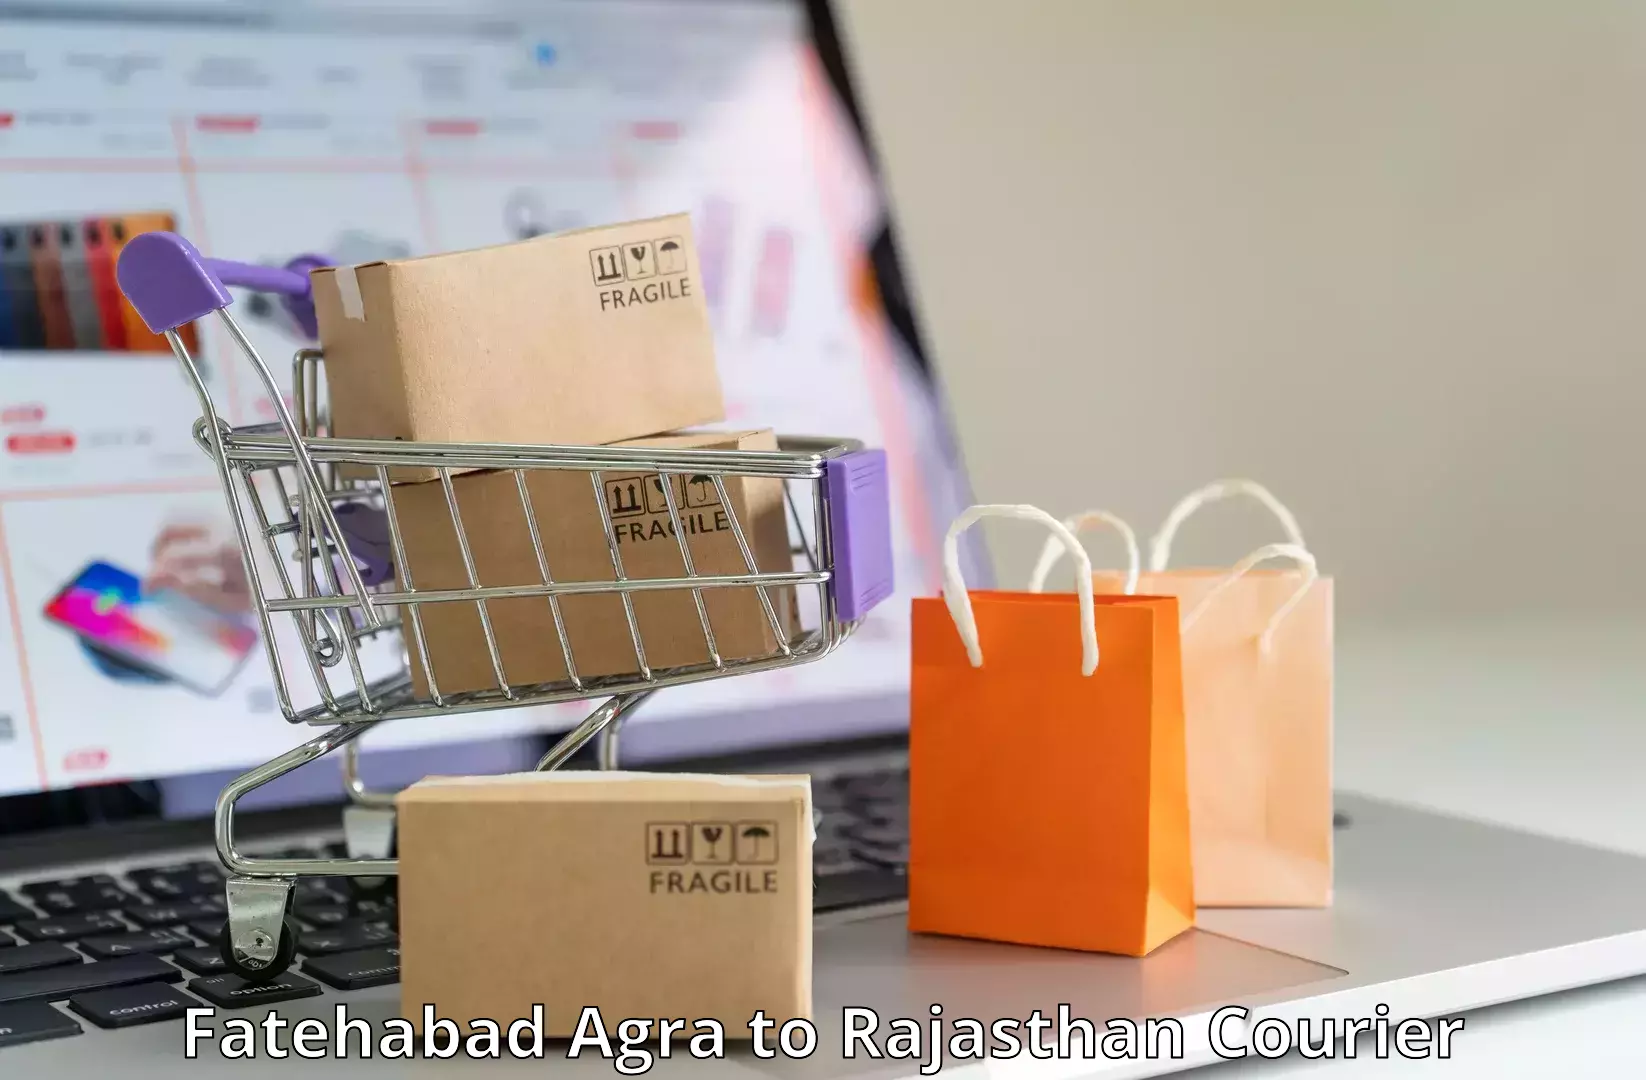 Flexible parcel services Fatehabad Agra to Merta